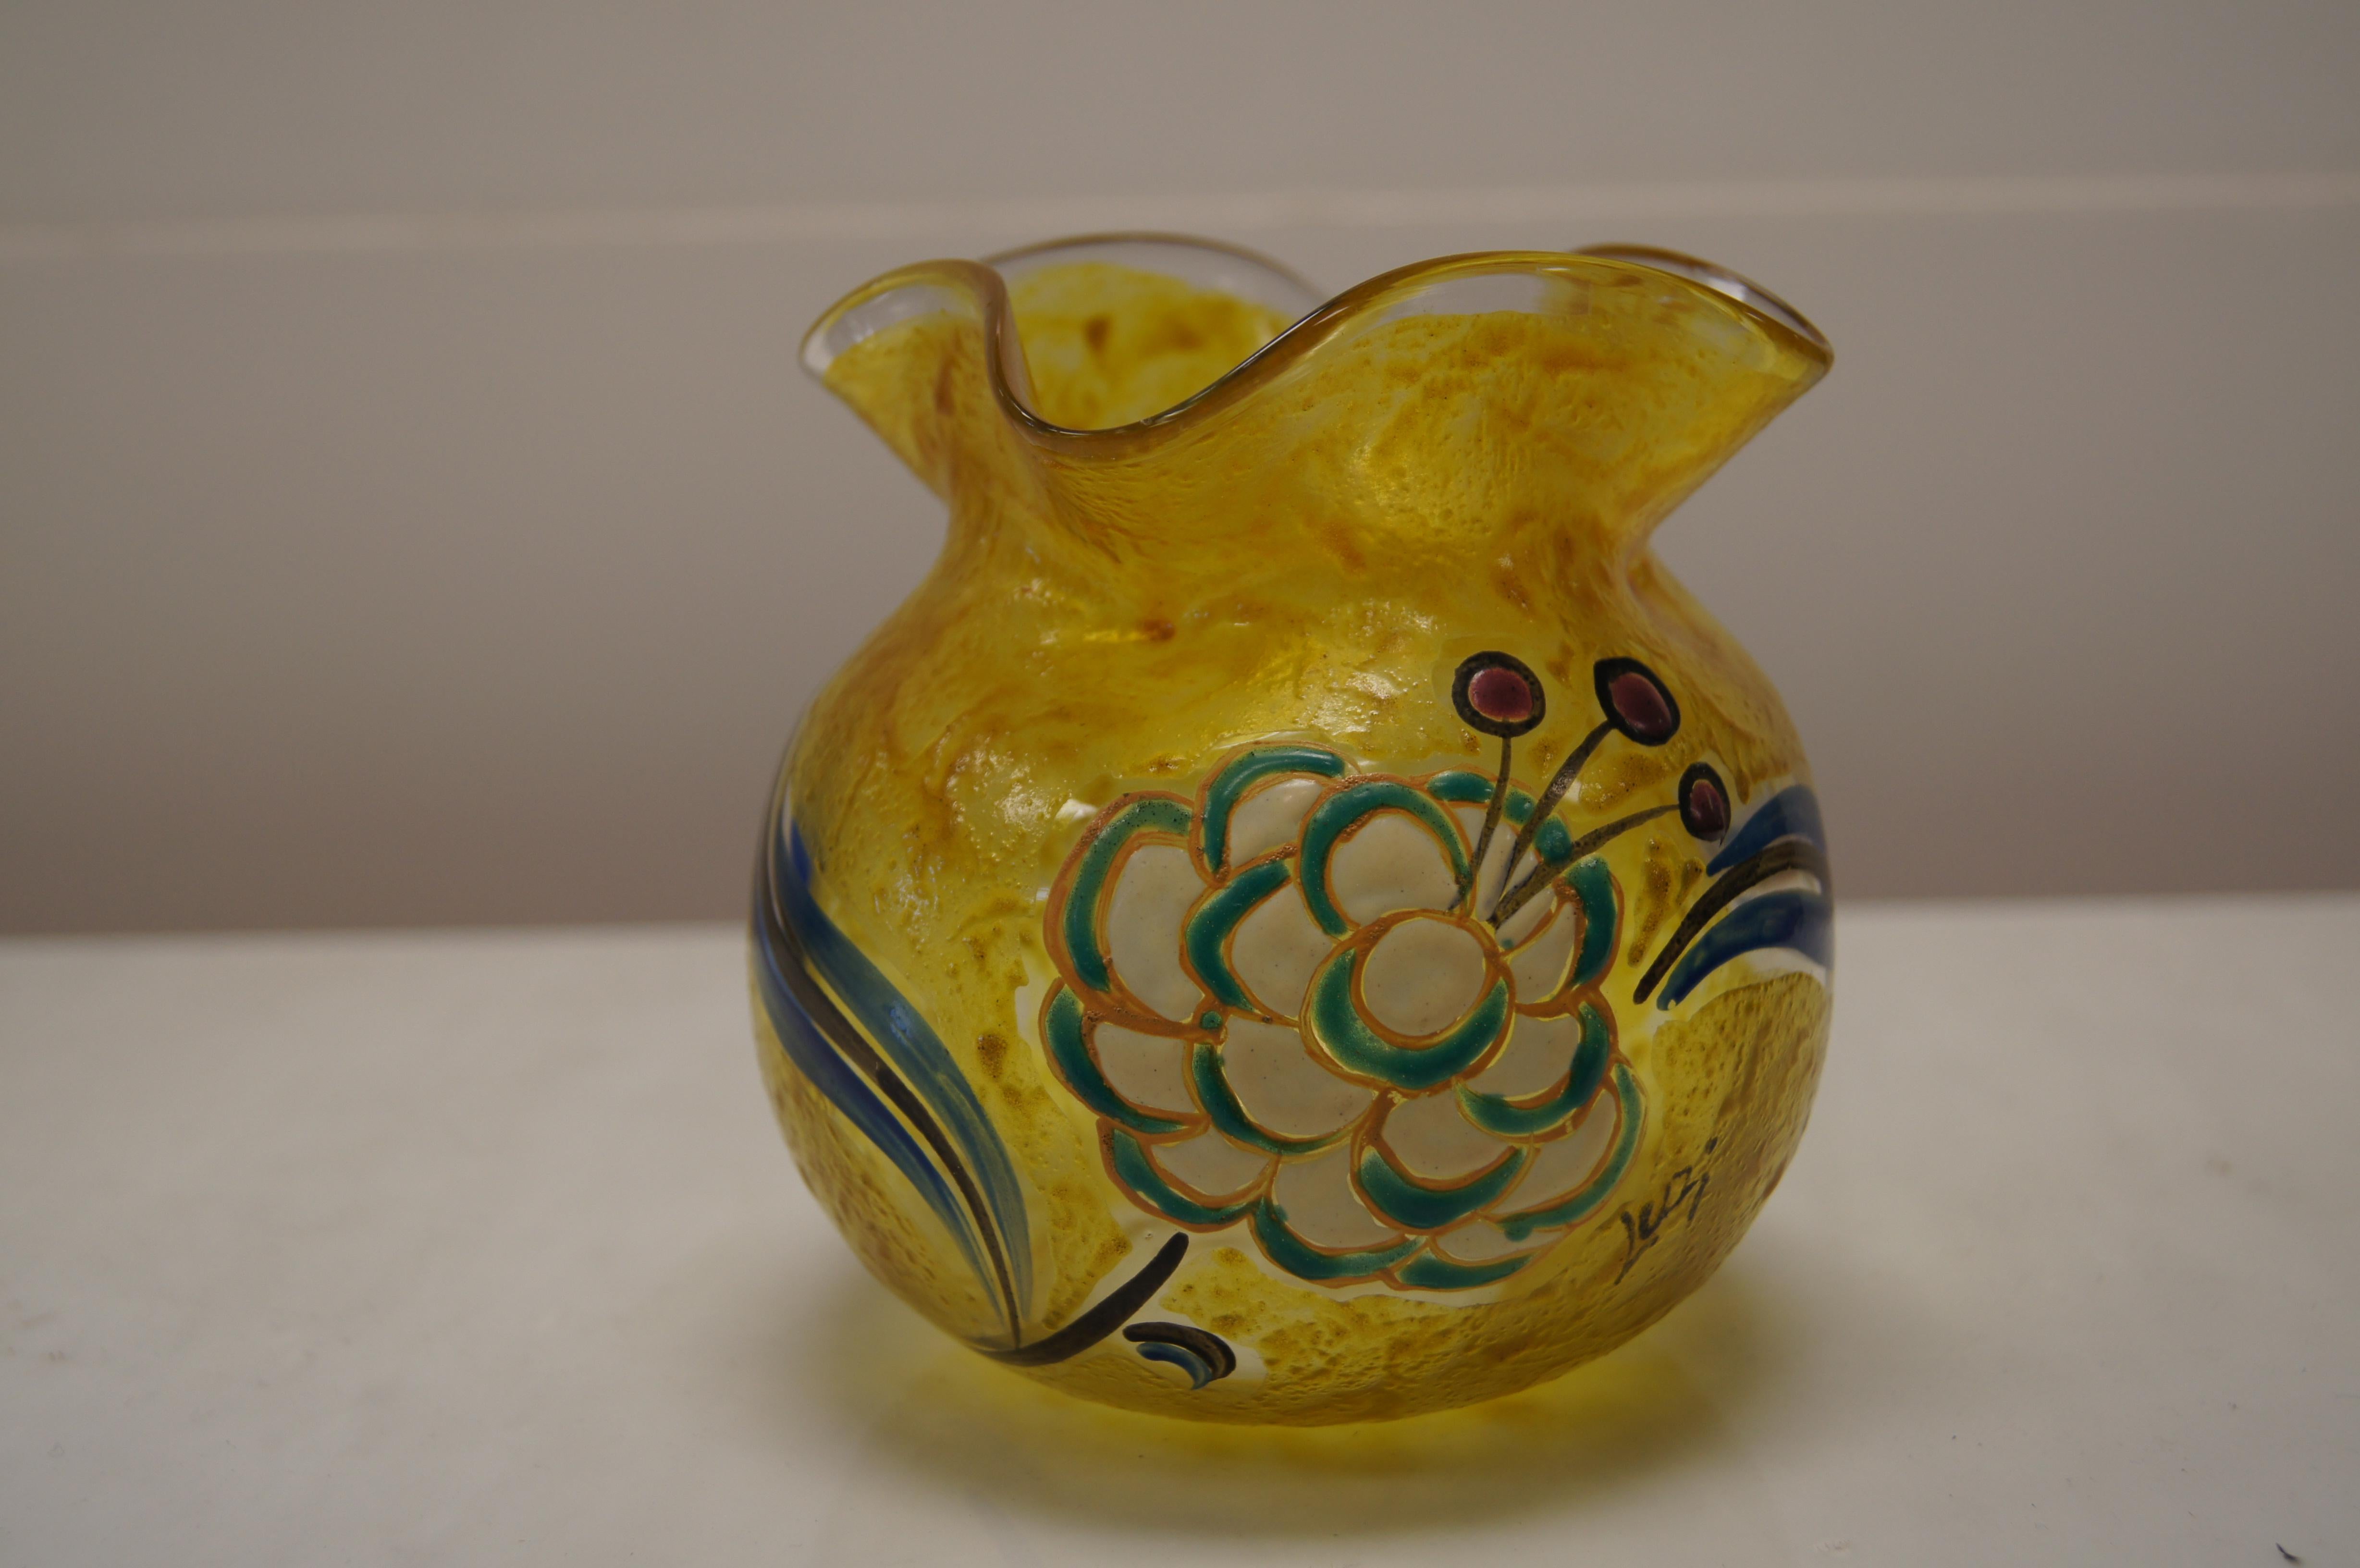 This lovely golden yellow vase from the Legras Verrerie of renowned glassmaker François-Théodore Legras features a round ball base with a fluted neck. Enameled on one side is a large flower blossom in cream, green, and blue. 

The vase is signed